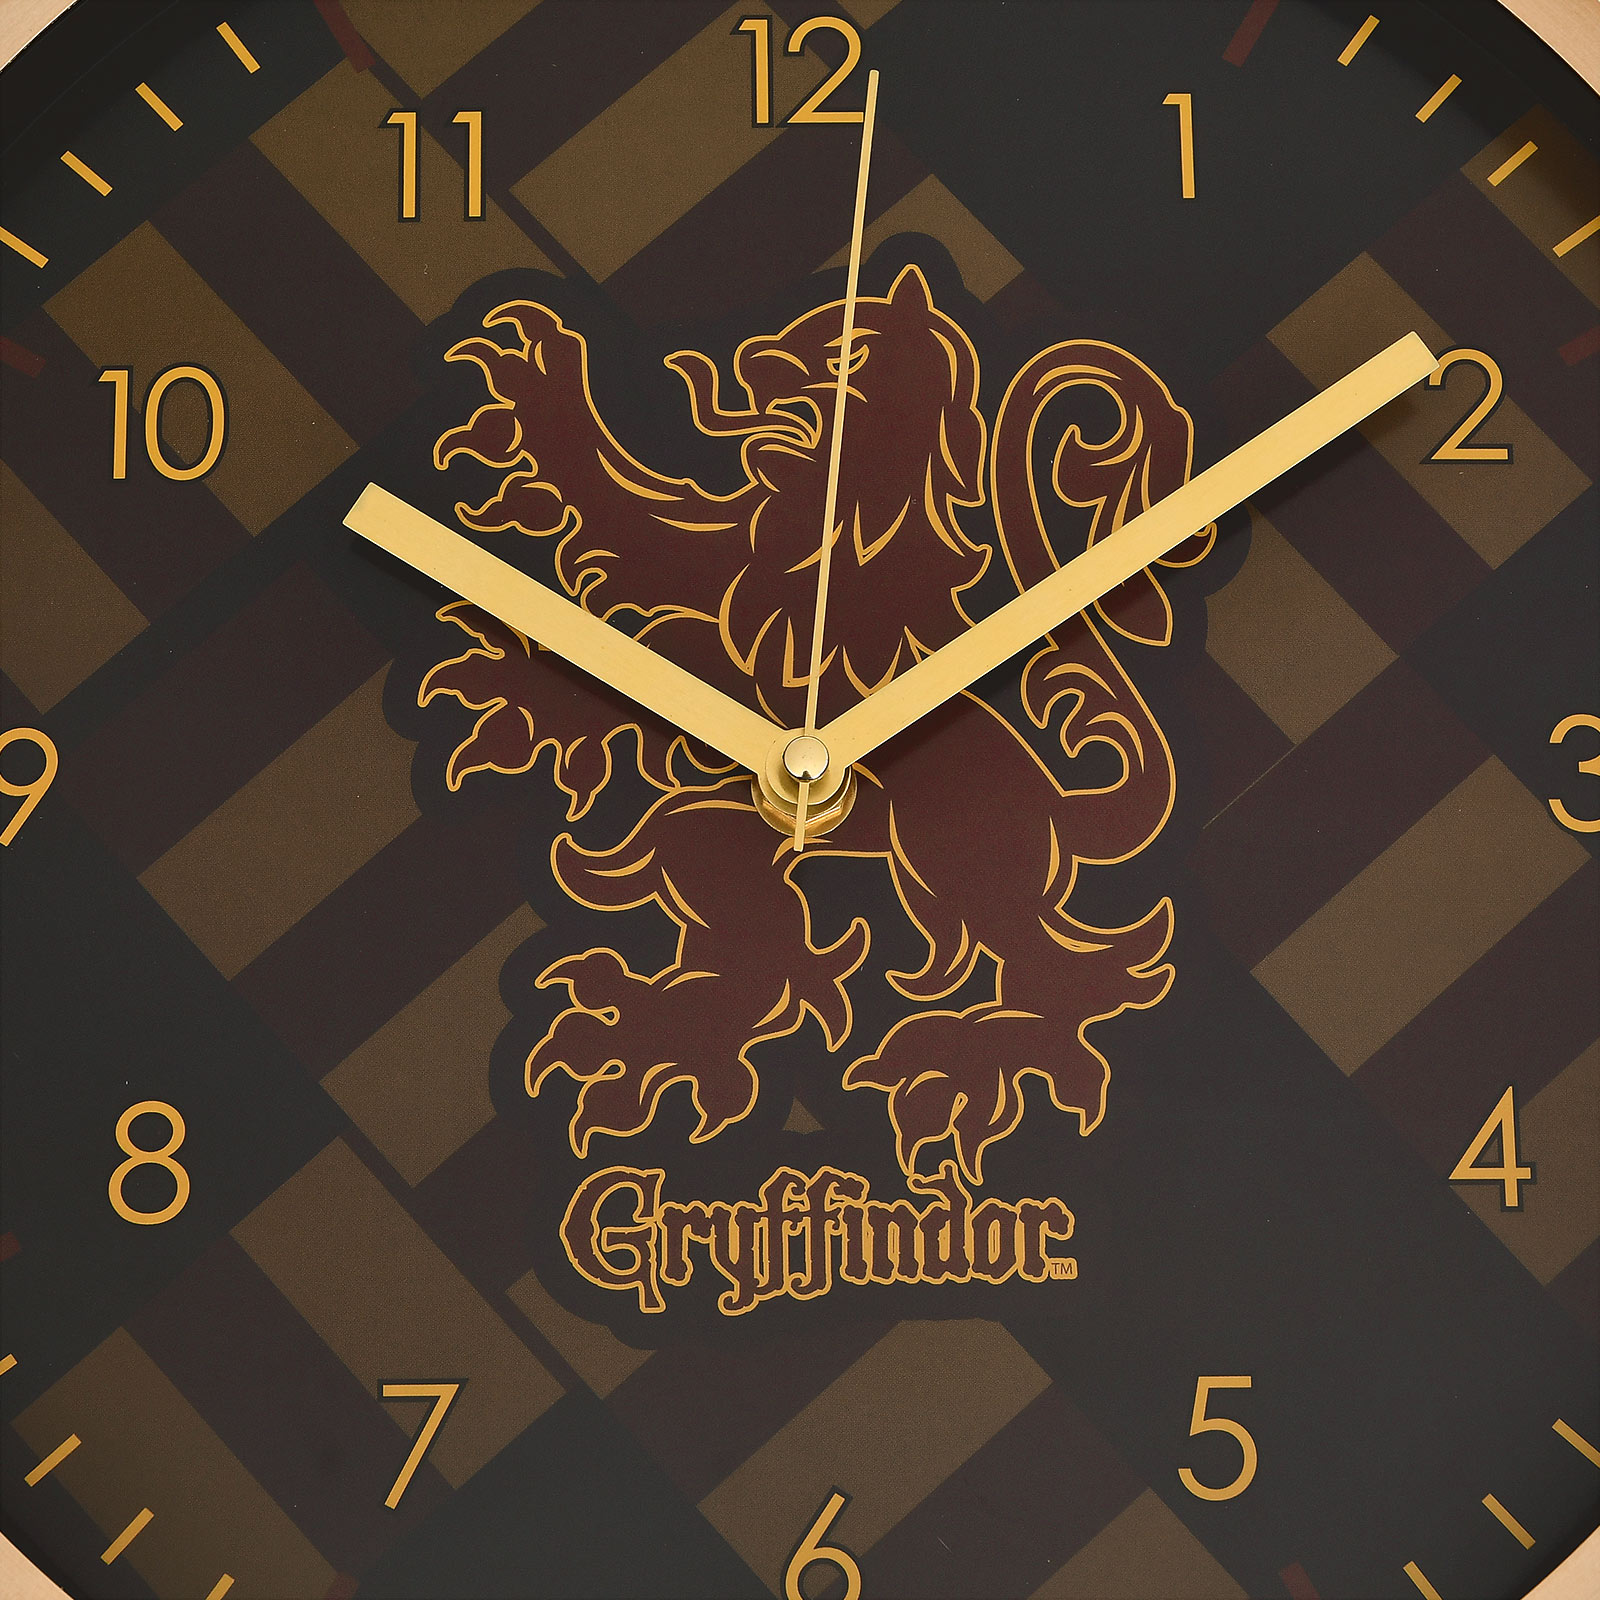 Harry Potter - Gryffindor Wall Clock